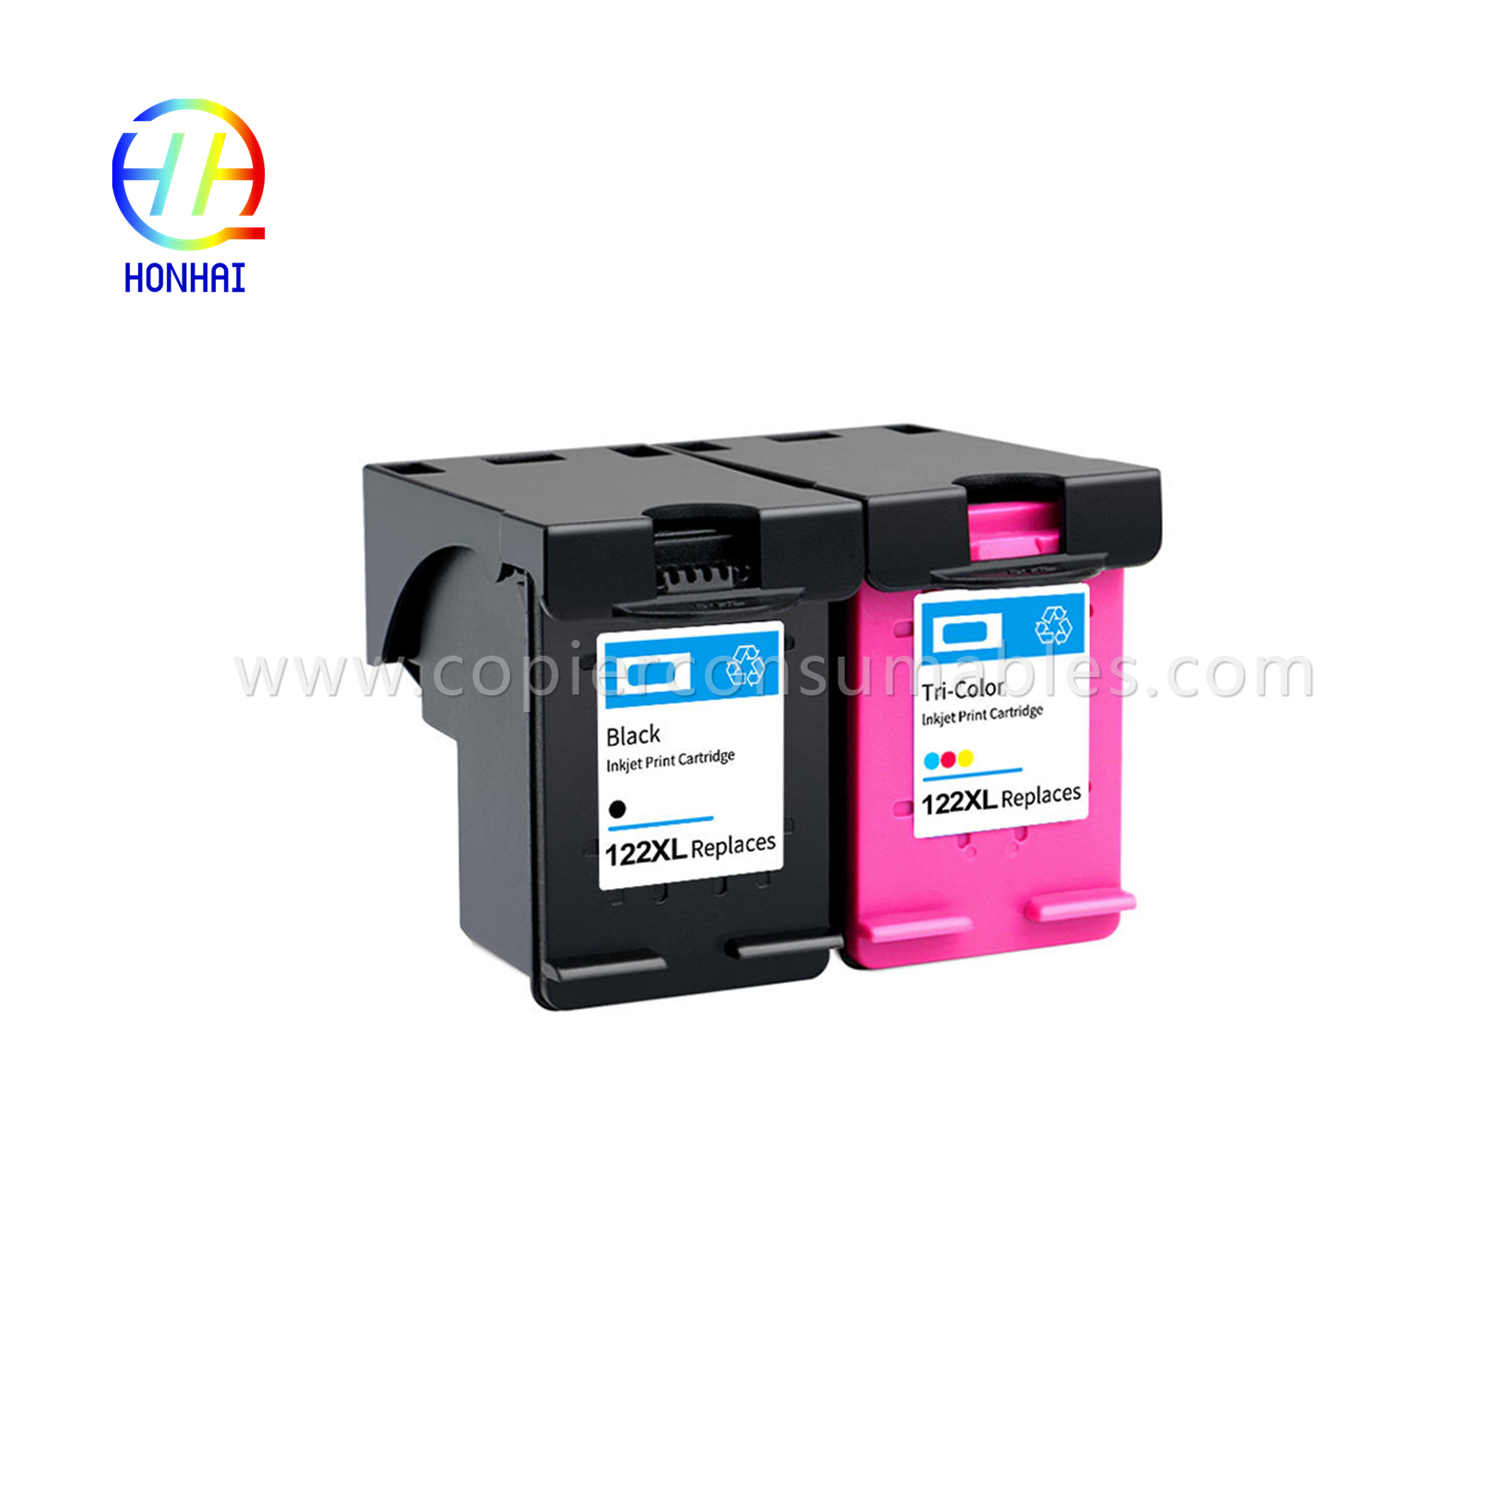 Ink Cartridge for HP DeskJet 1000 1050 1050A 1510 2000 2050 2050A 2054A  3000 3050 3050A 3052A 3054A HP 122XLCH563HE Black  CH564HE color